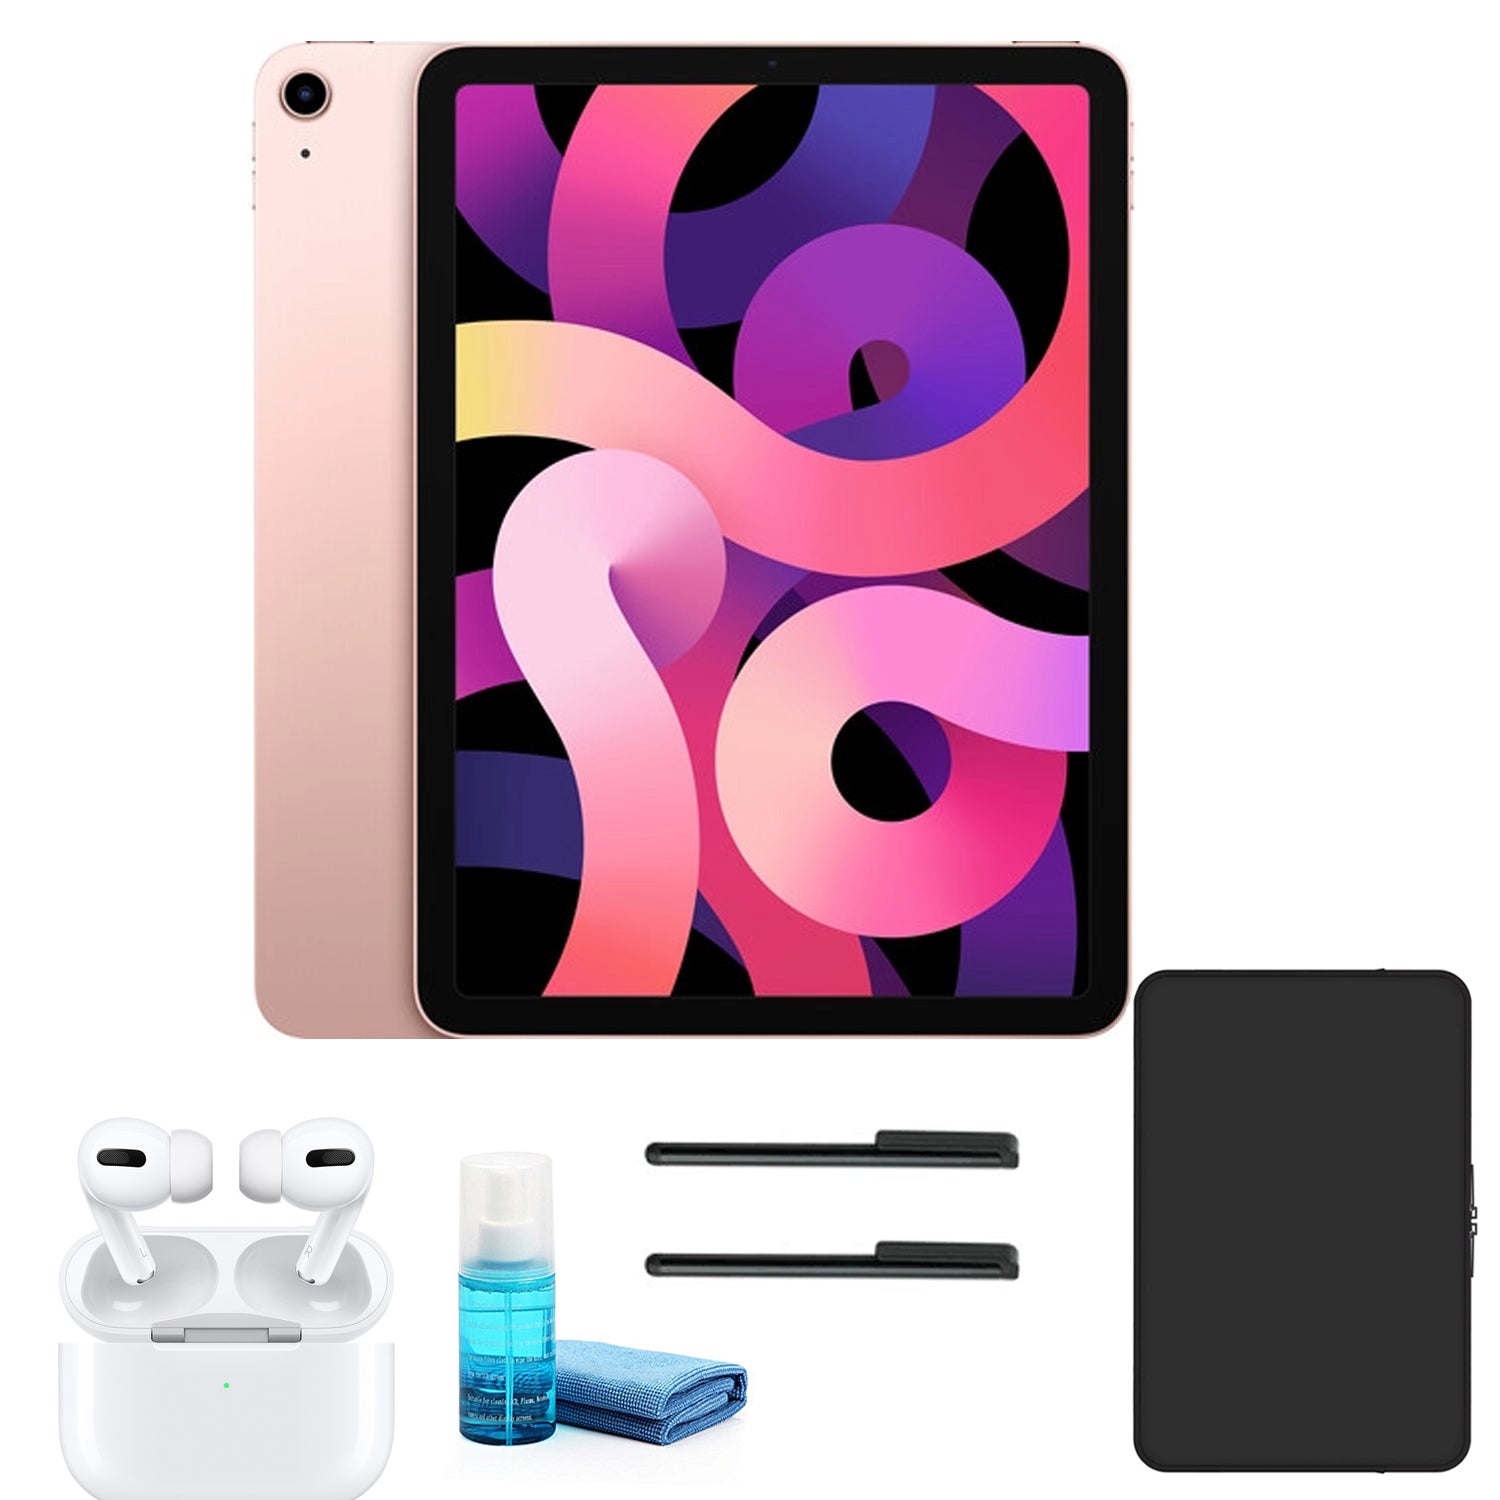 Apple iPad Air 10.9 Inch (64GB, Wi-Fi Only, Rose Gold)) with Apple Airpods Pro Bundle